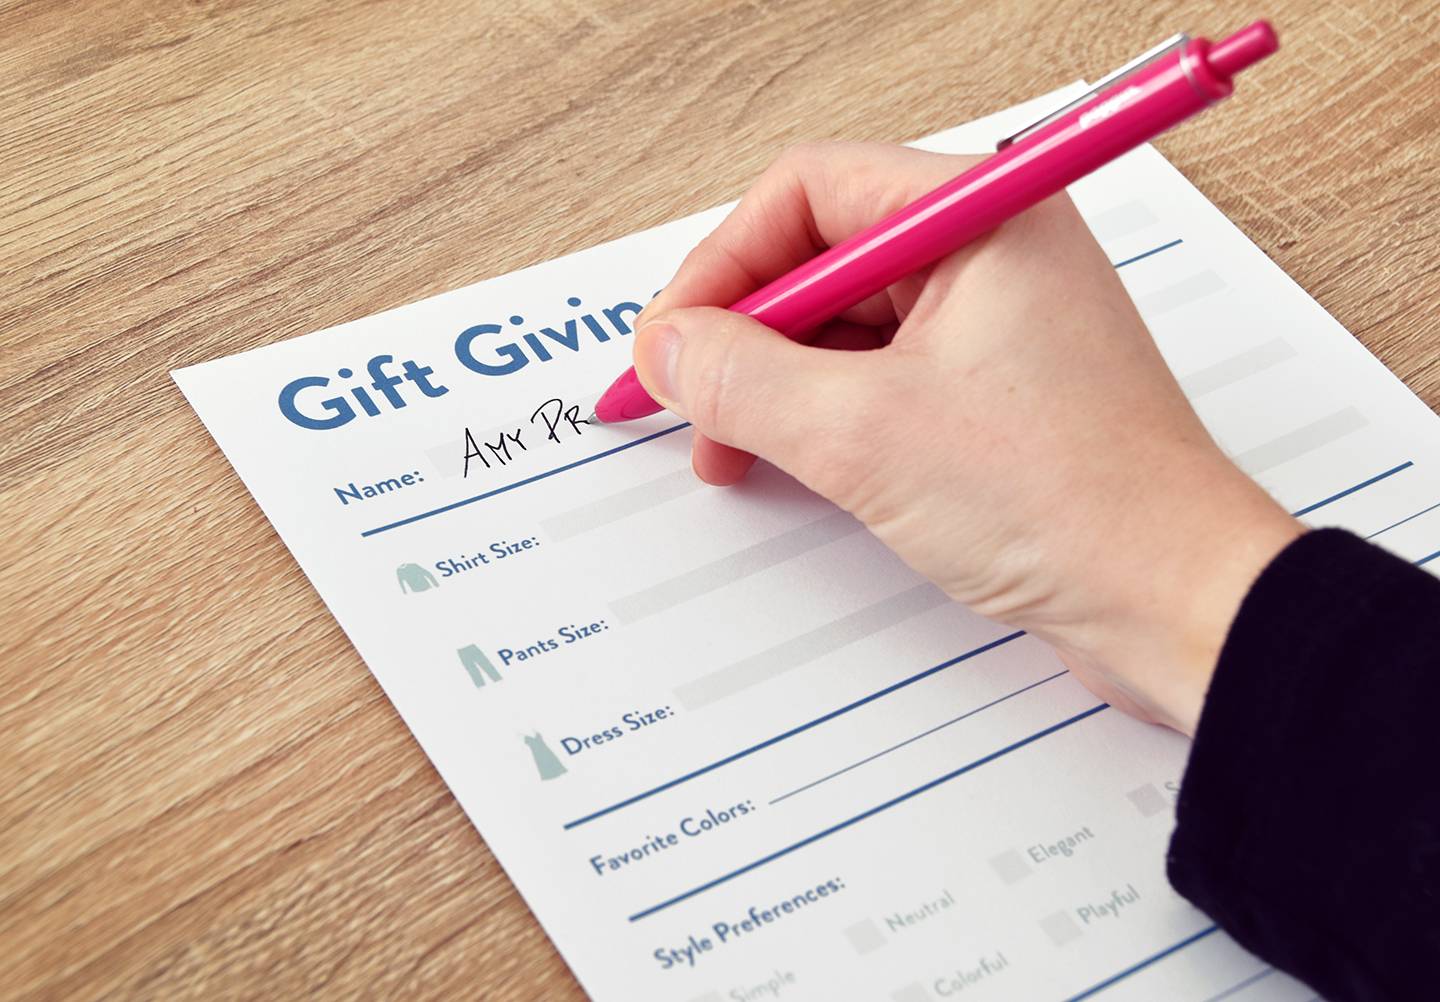 Person is writing on a gift giving sheet using pen.